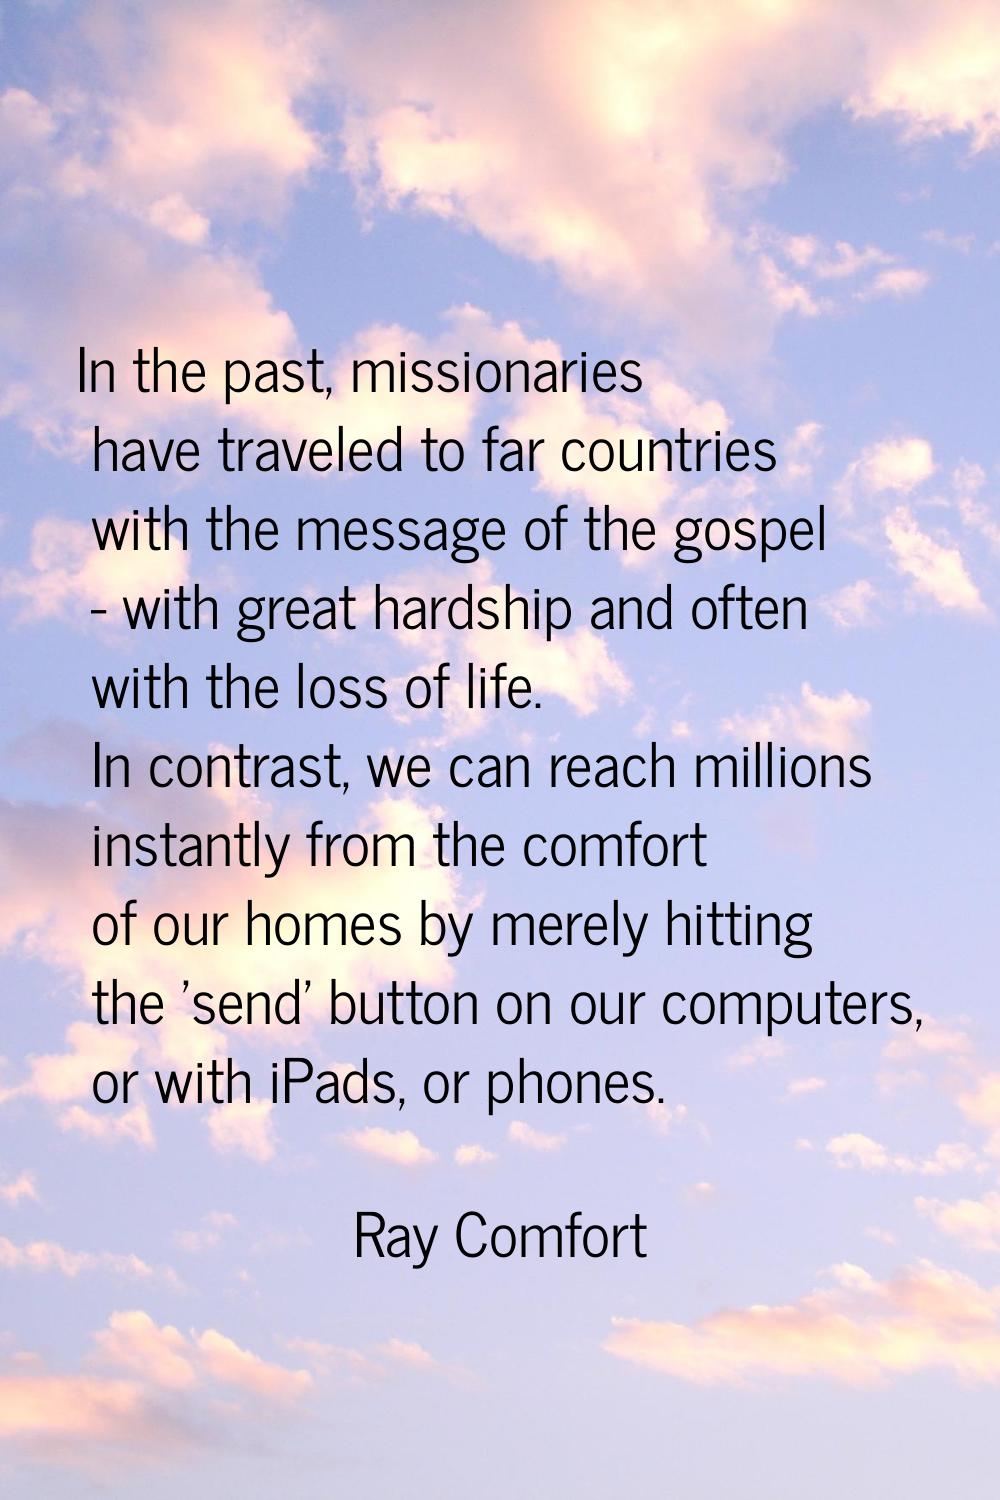 In the past, missionaries have traveled to far countries with the message of the gospel - with grea